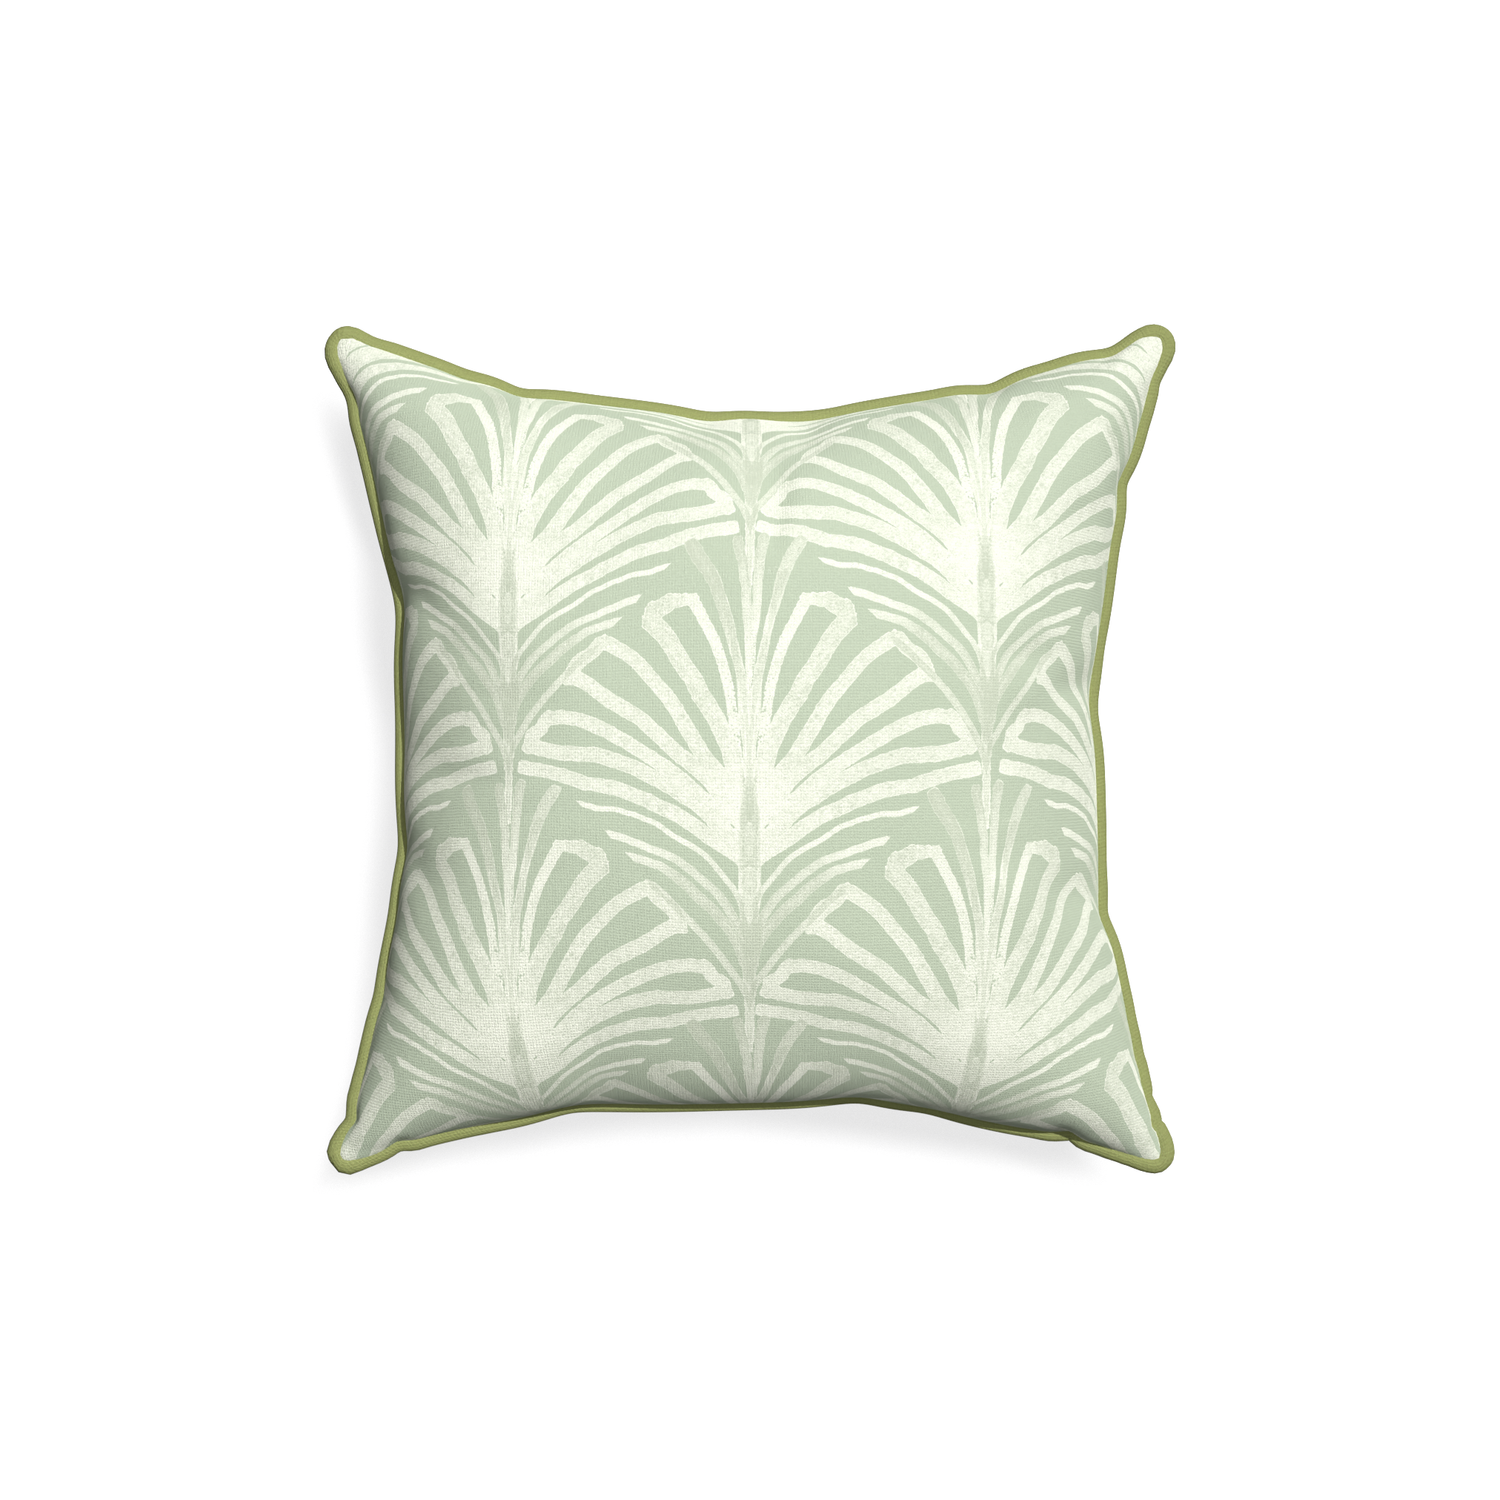 18-square suzy sage custom sage green palmpillow with moss piping on white background